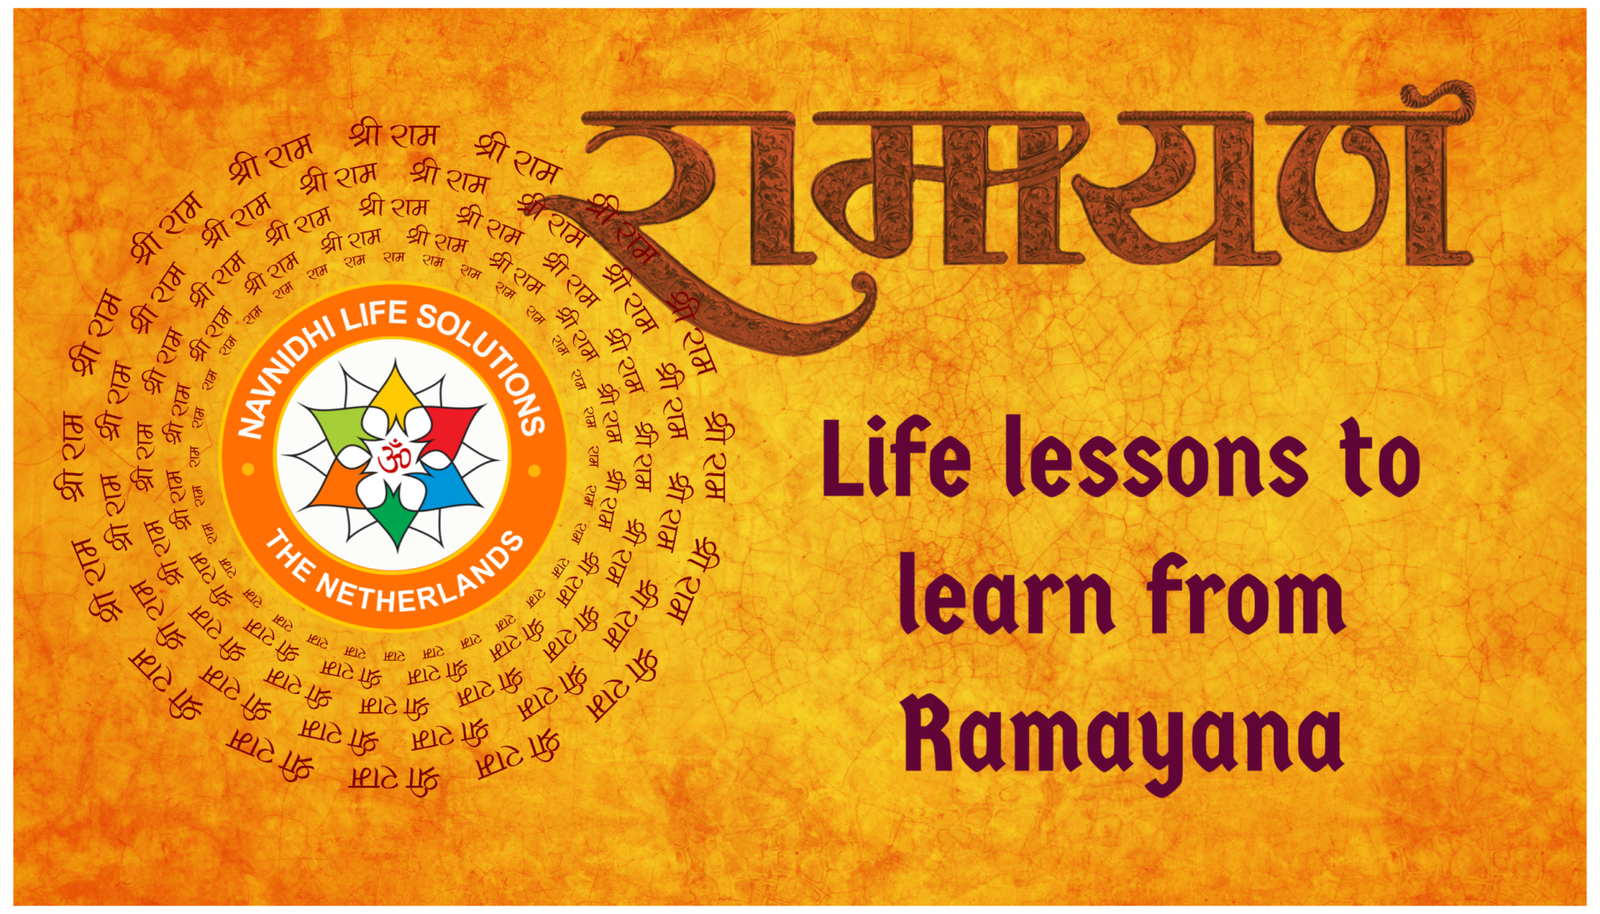 Life lessons to learn from Ramayana moral values